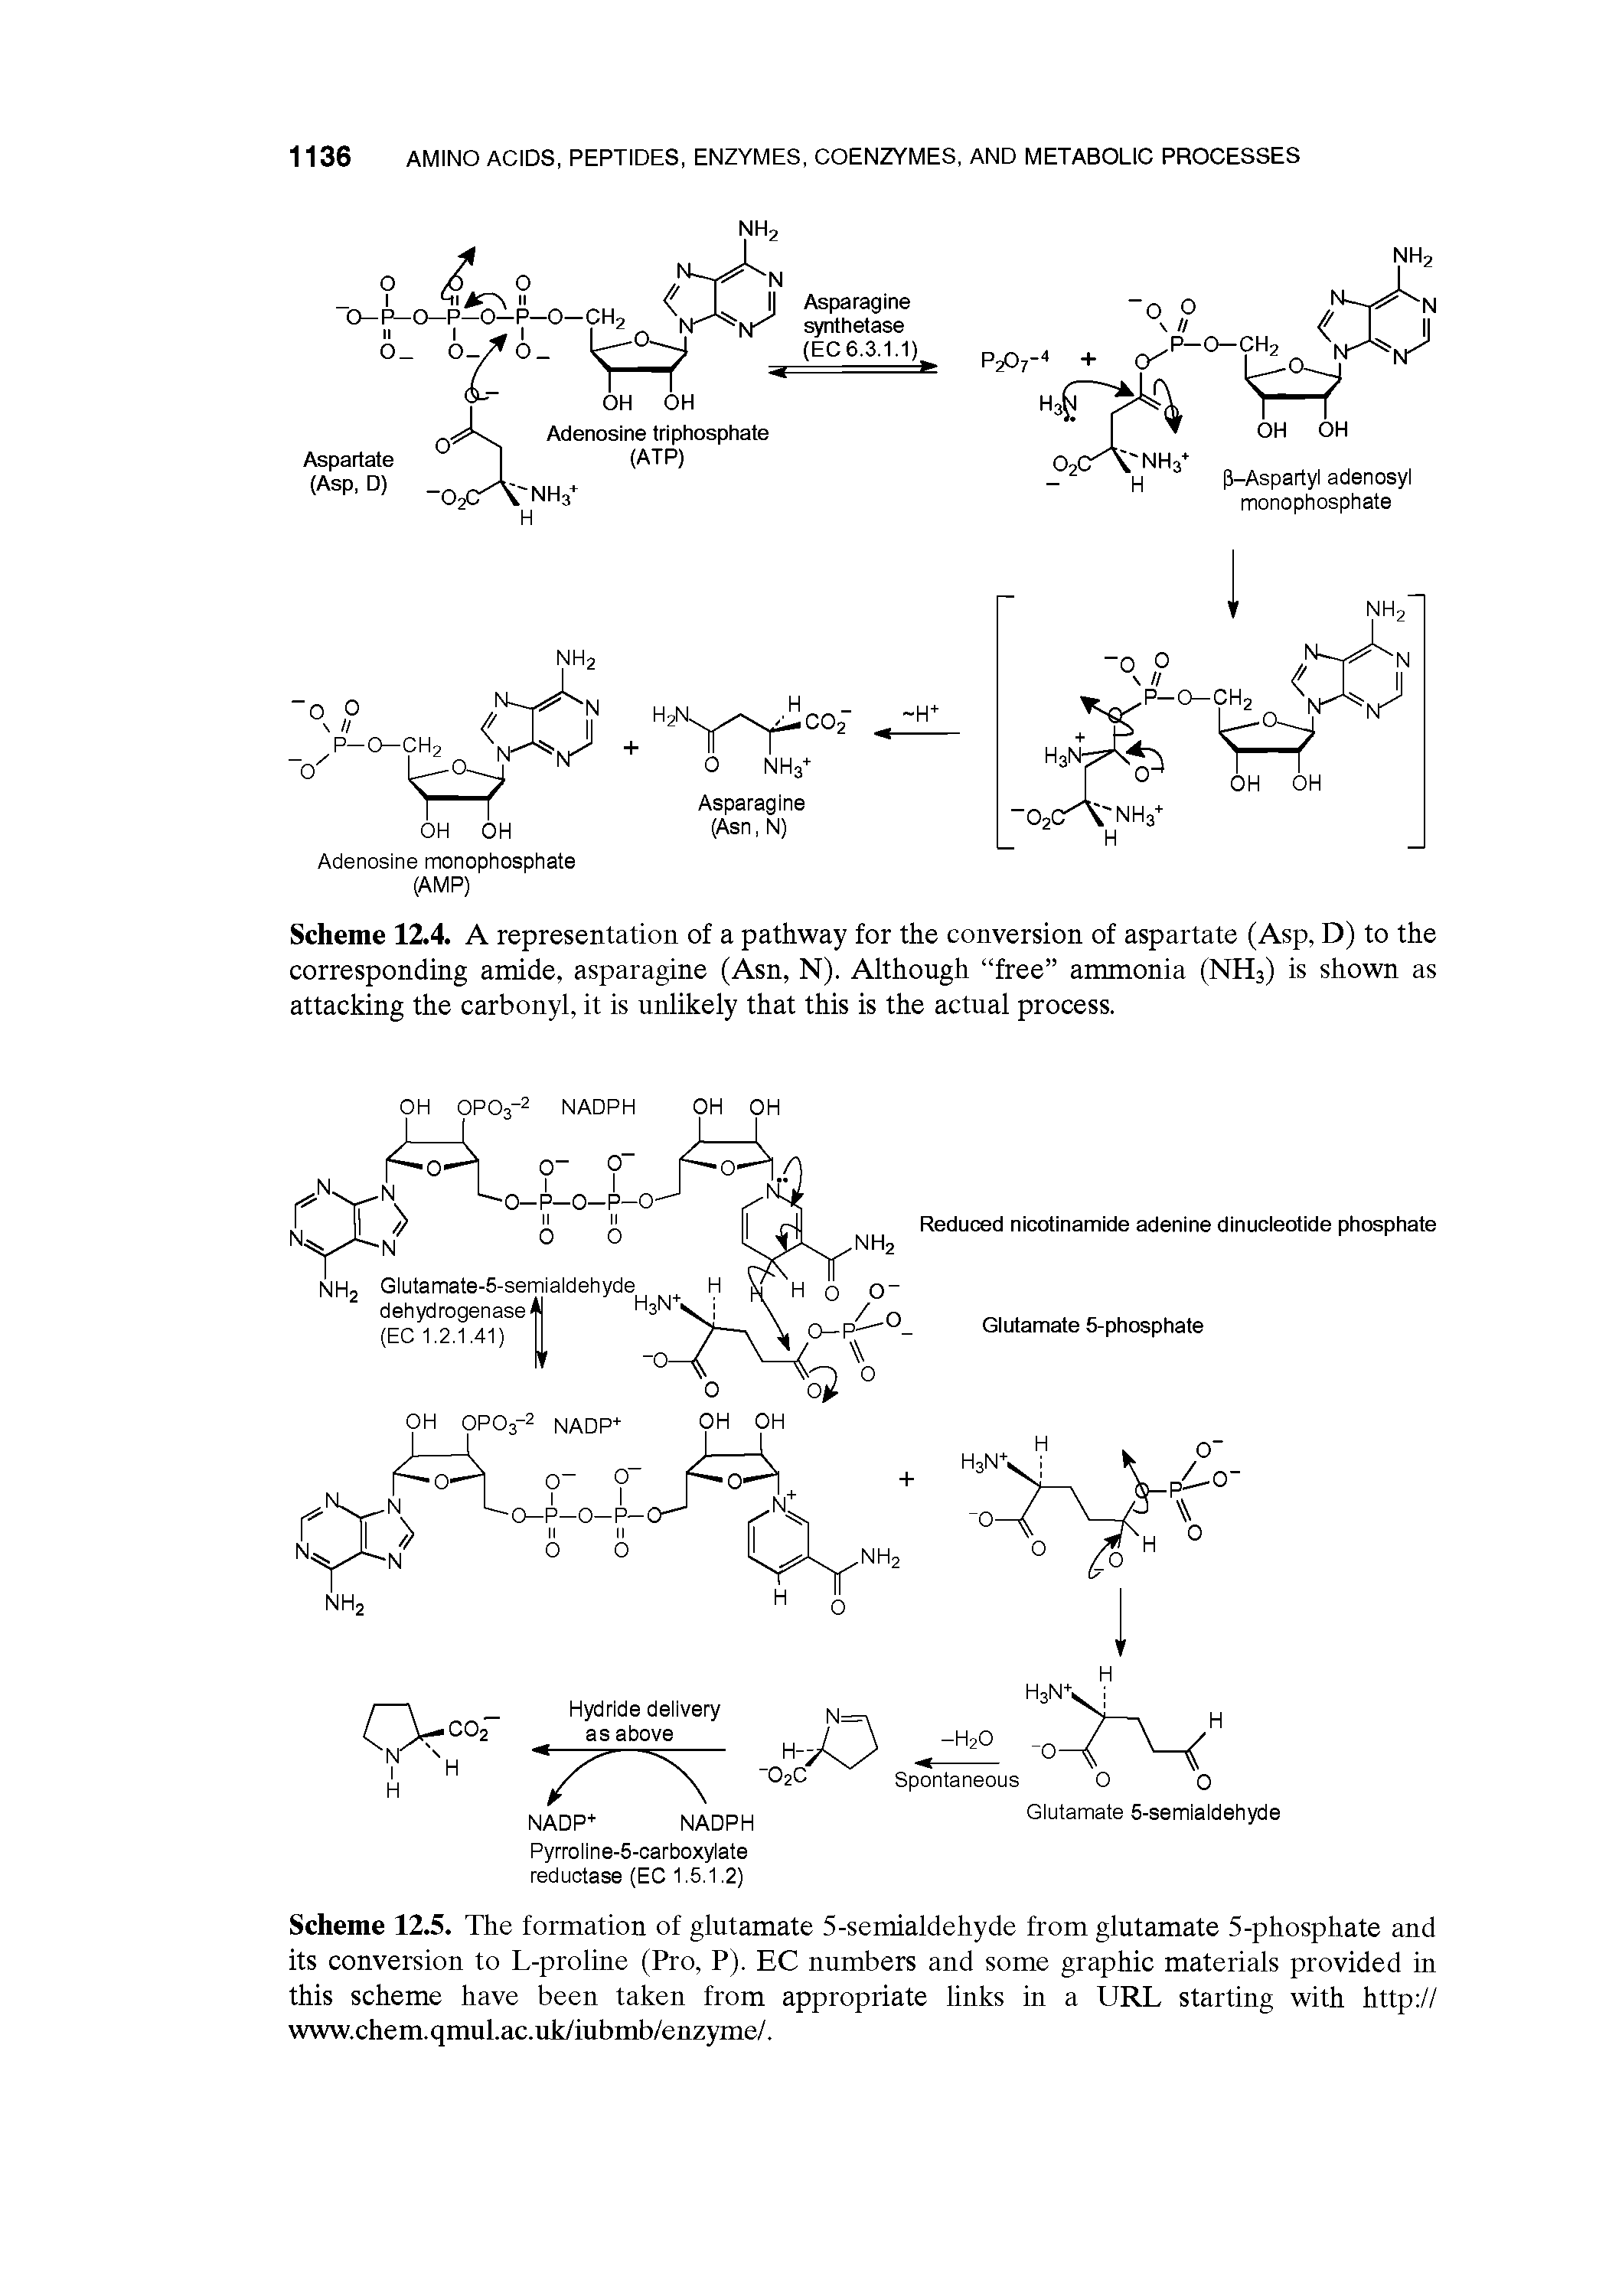 Scheme 12.5. The formation of glutamate 5-semialdehyde from glutamate 5-phosphate and its conversion to L-proline (Pro, P). EC numbers and some graphic materials provided in this scheme have been taken from appropriate links in a URL starting with http // www.chem.qmul.ac.uk/iubmb/enzyme/.